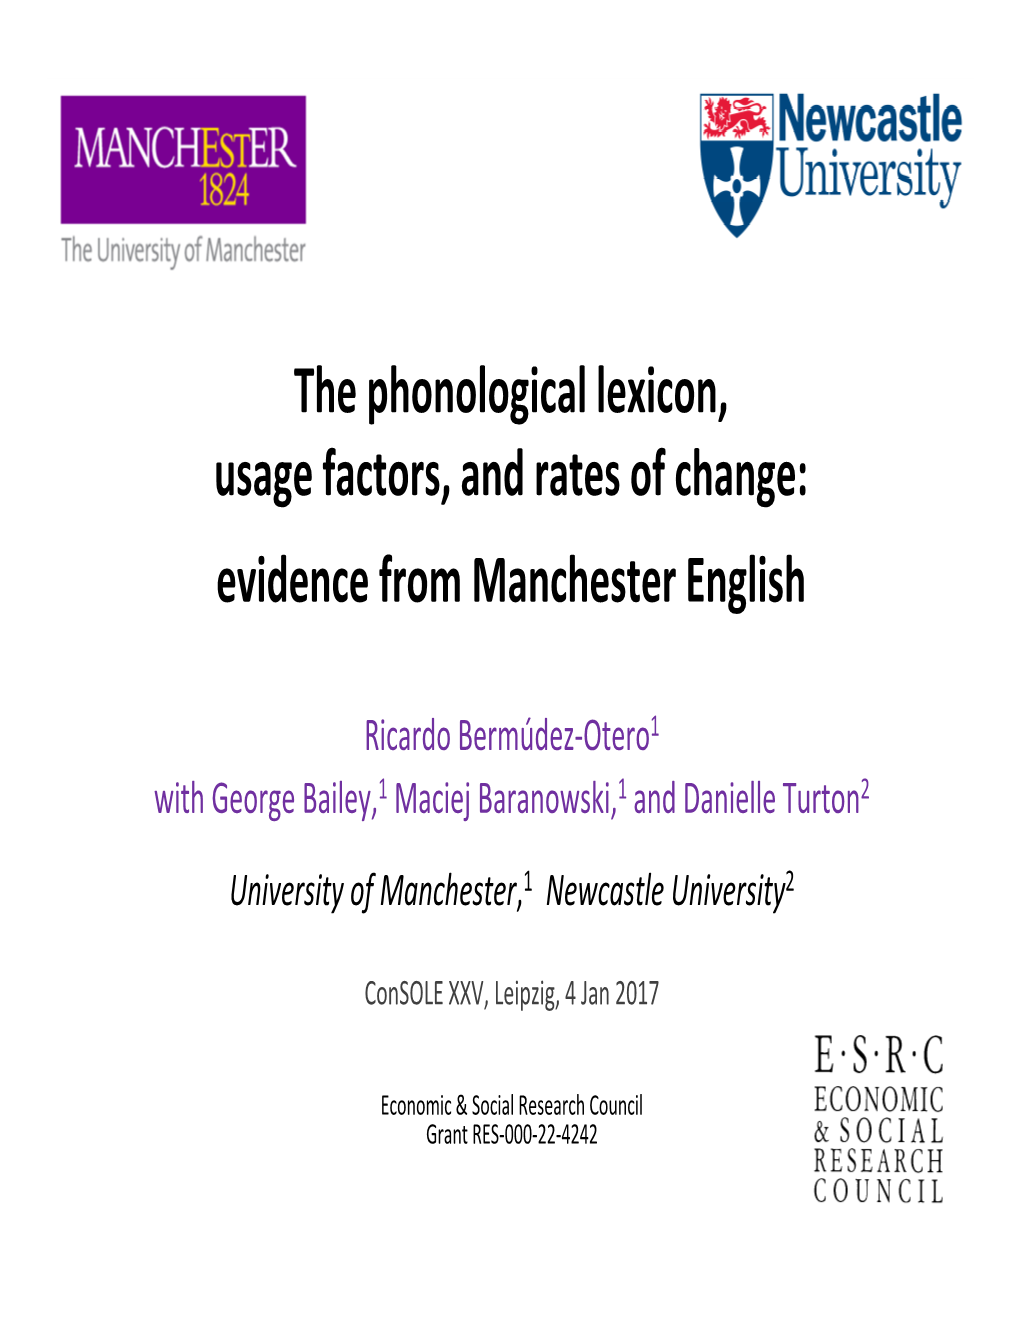 The Phonological Lexicon, Usage Factors, and Rates of Change: Evidence from Manchester English